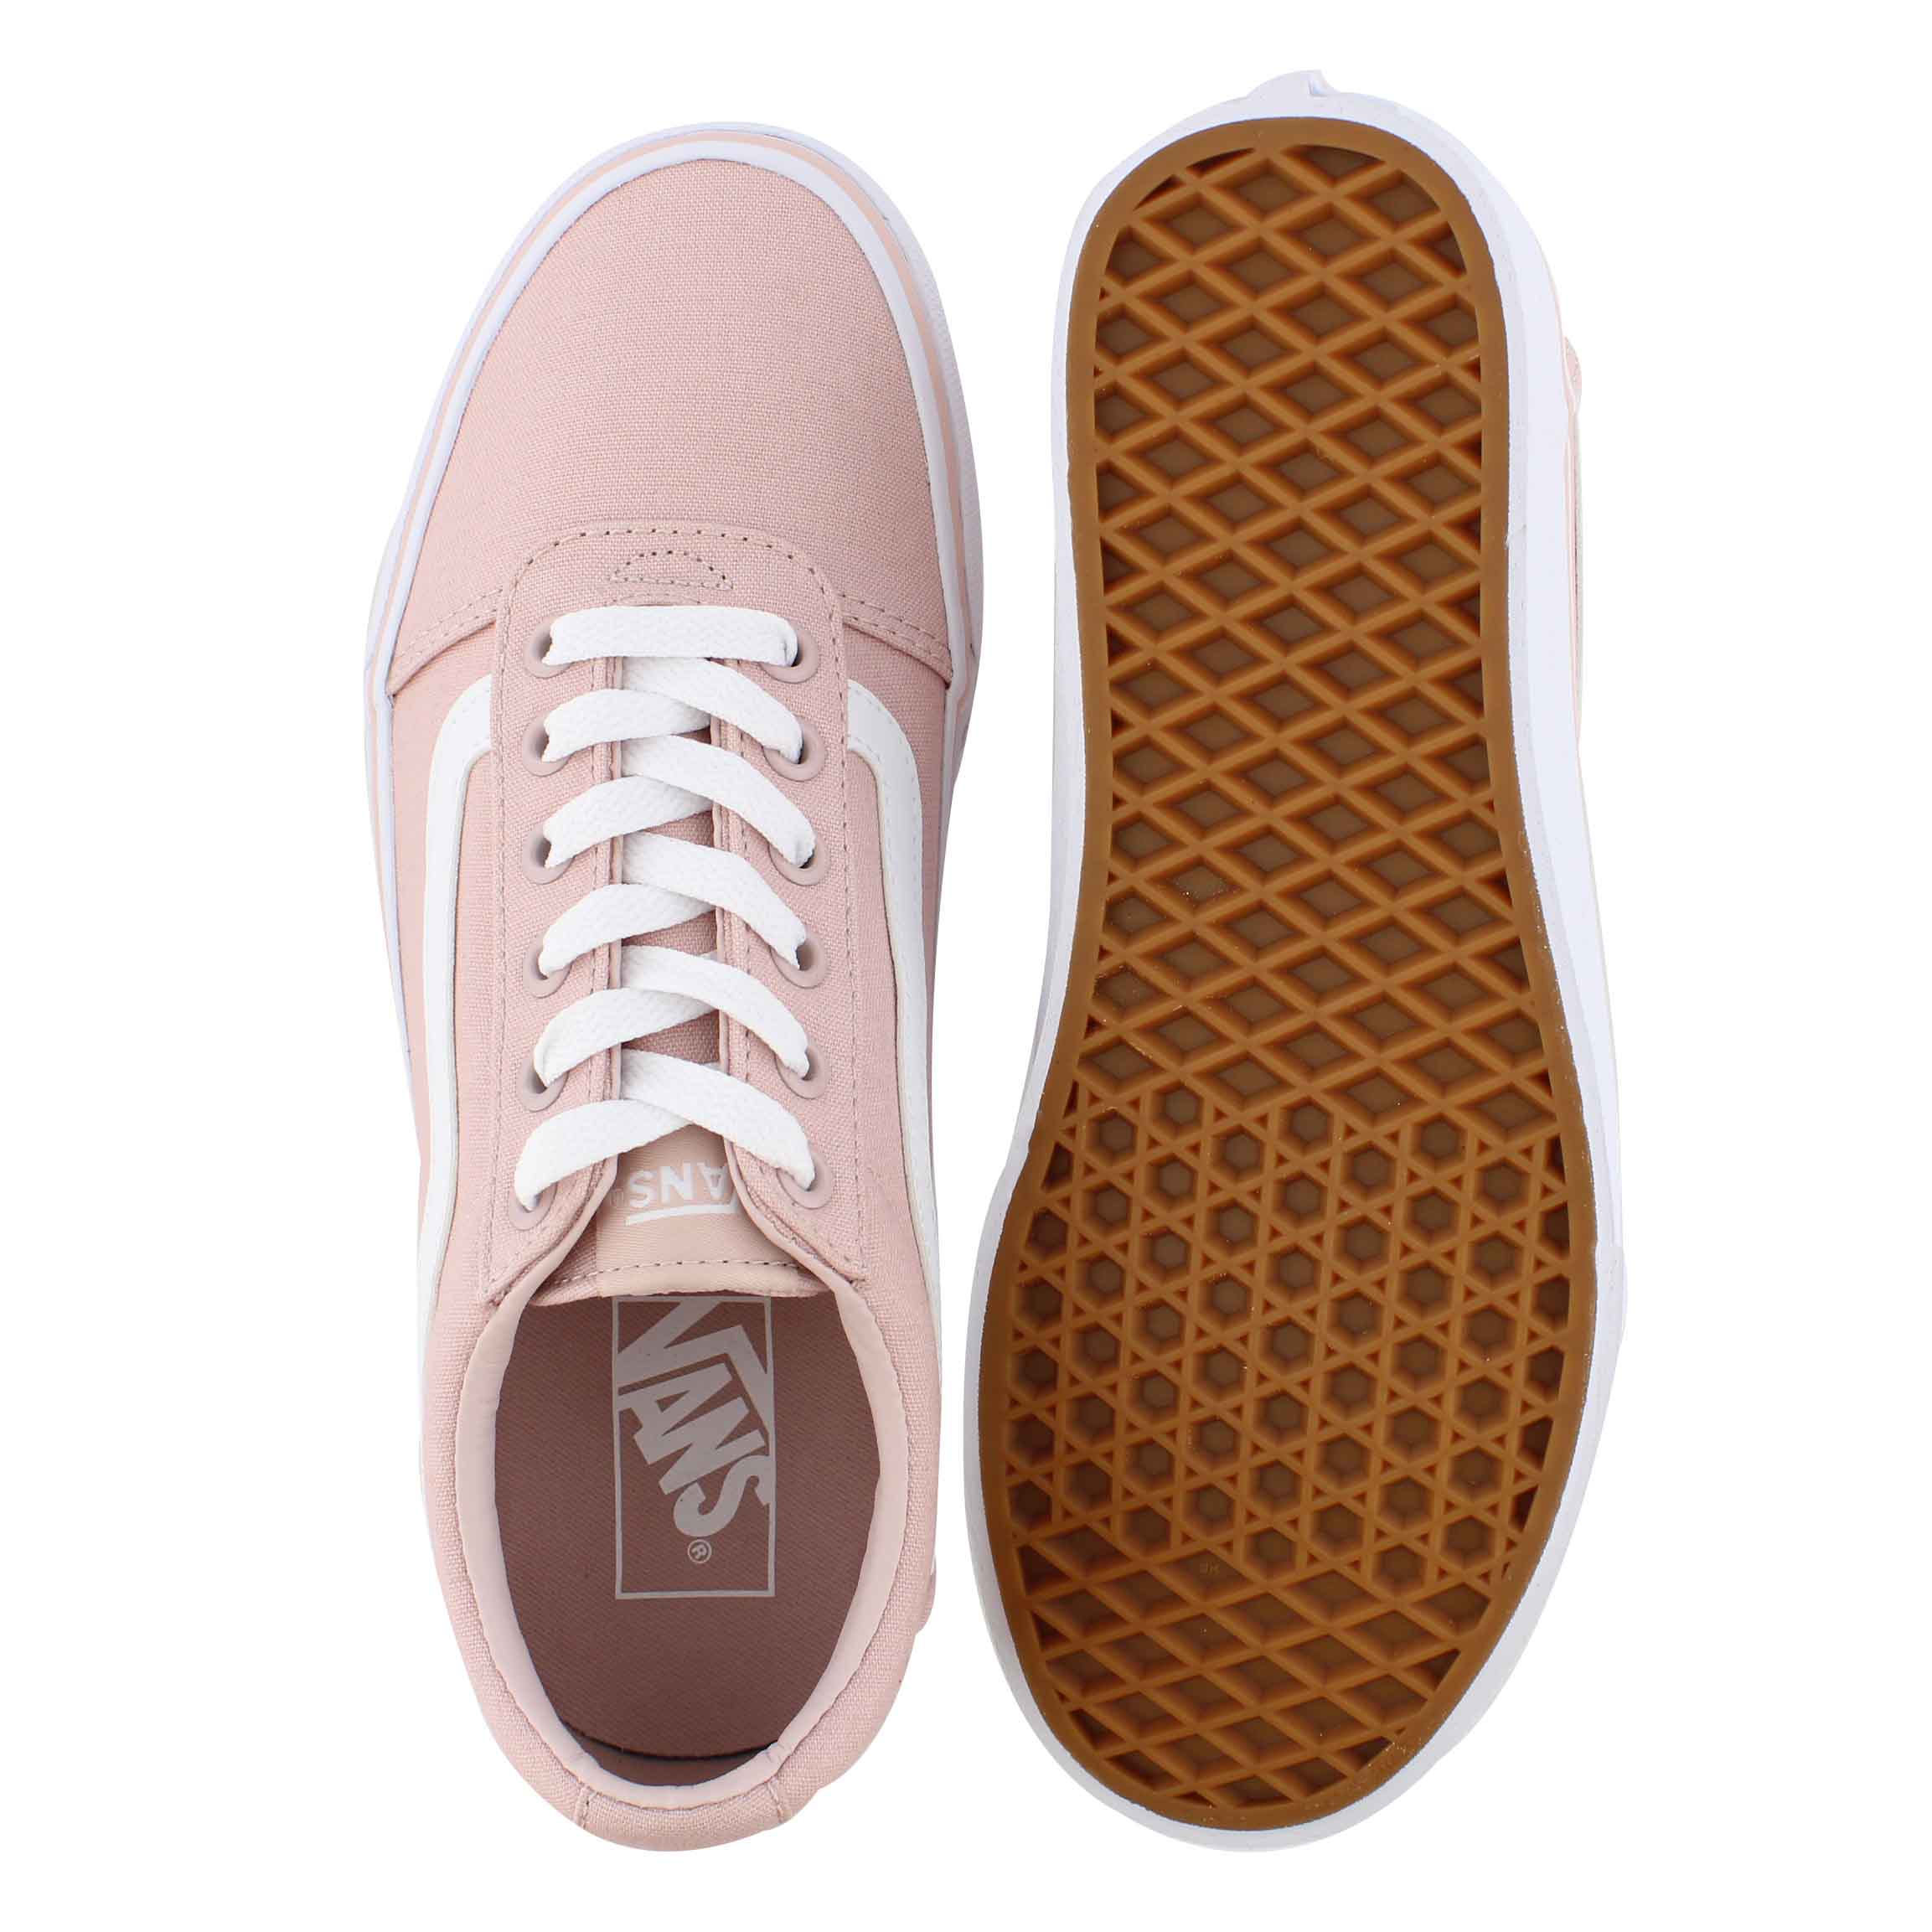 Vans Women's WARD sepia rose lace up sneakers | SoftMoc.com